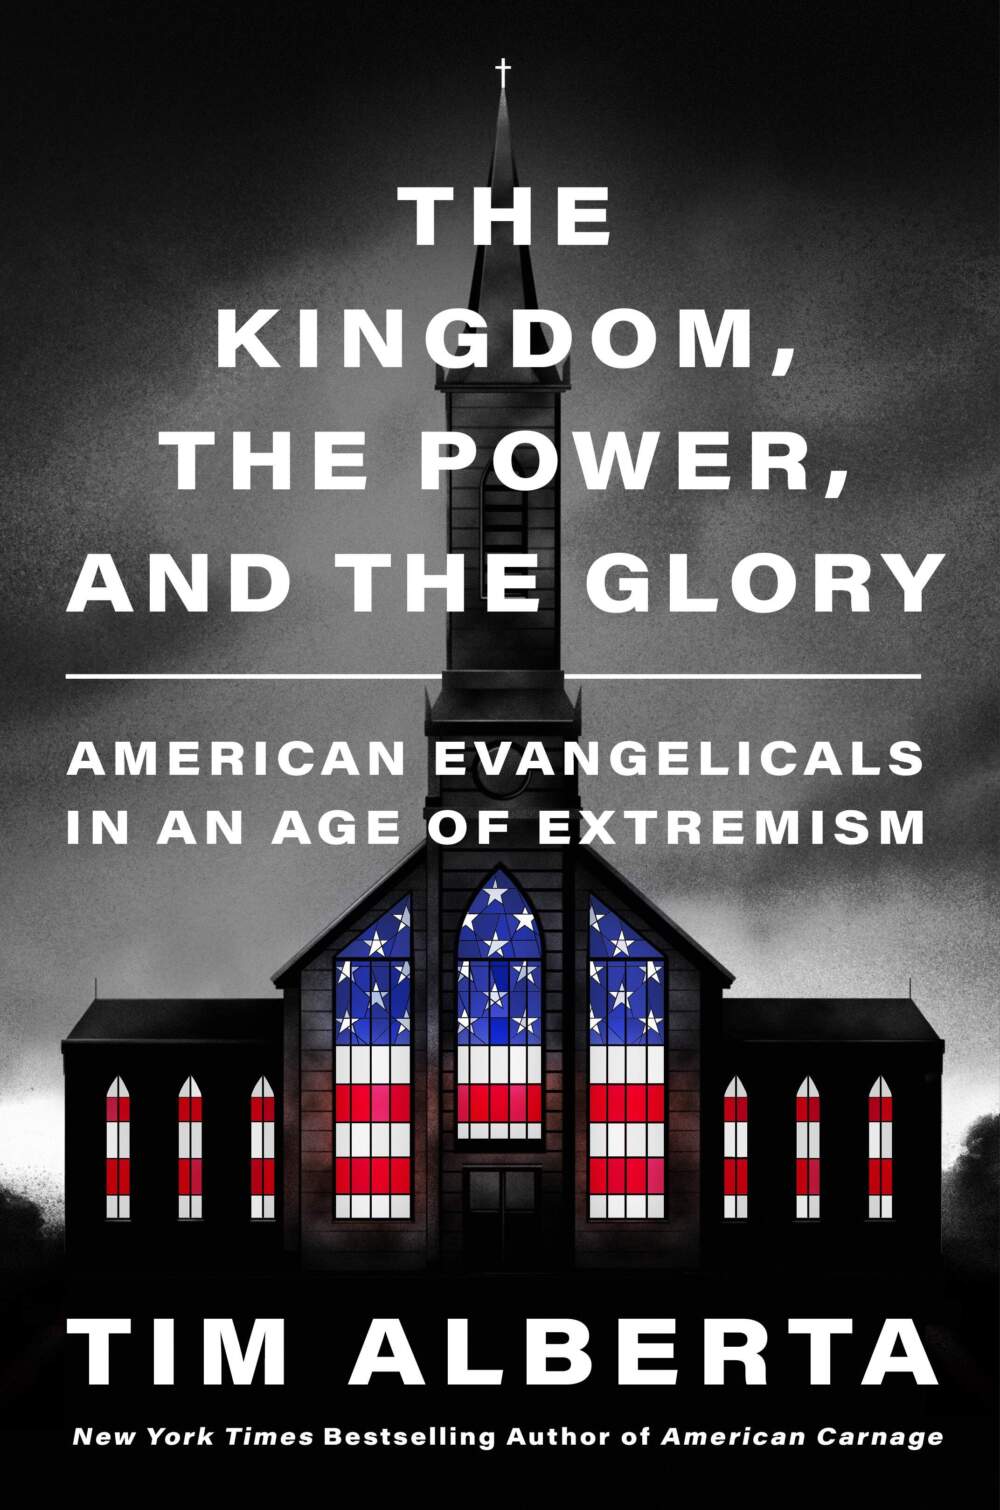 The cover of “The Kingdom, The Power, and The Glory: American Evangelicals In An Age of Extremism" by Tim Alberta. (Courtesy)